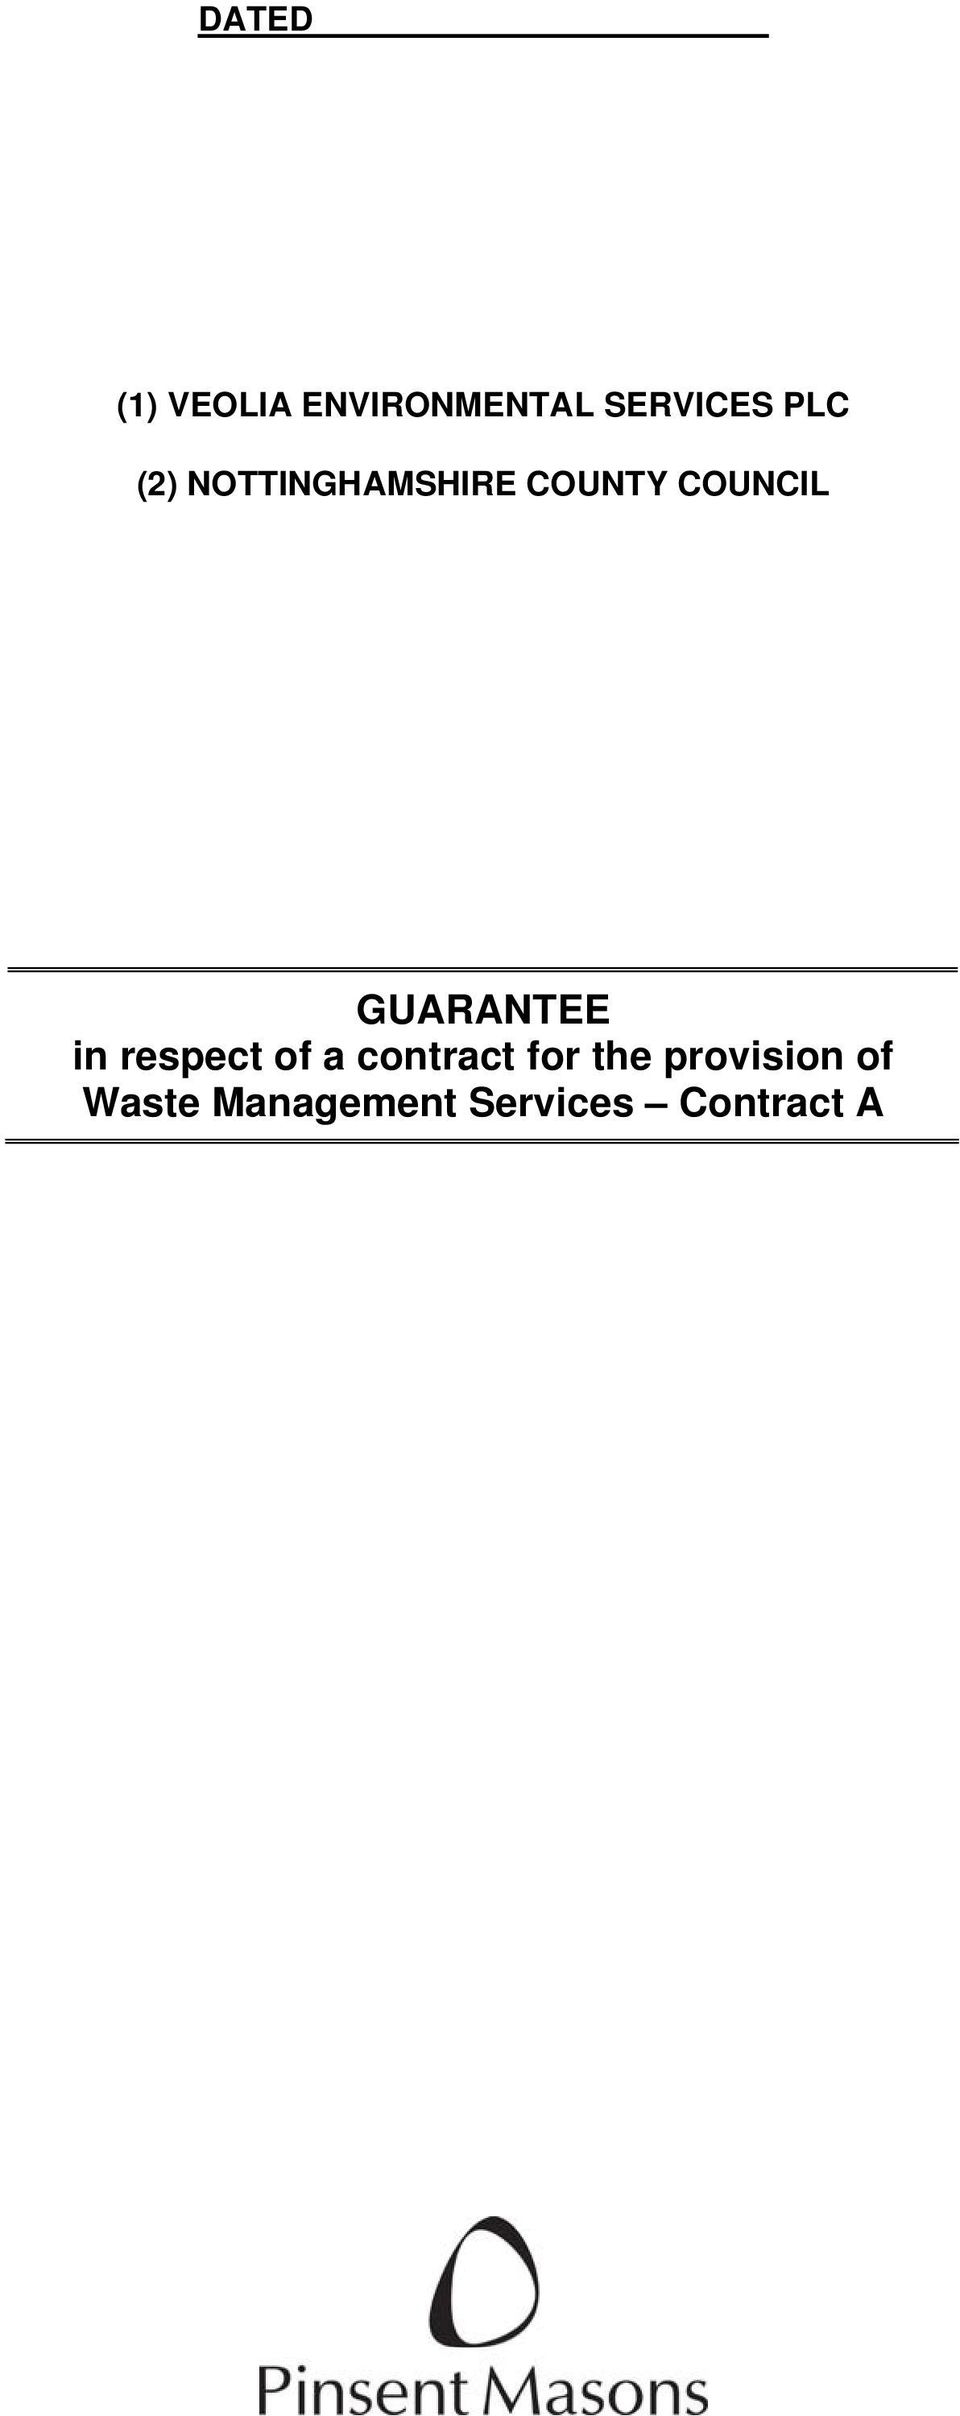 GUARANTEE in respect of a contract for the